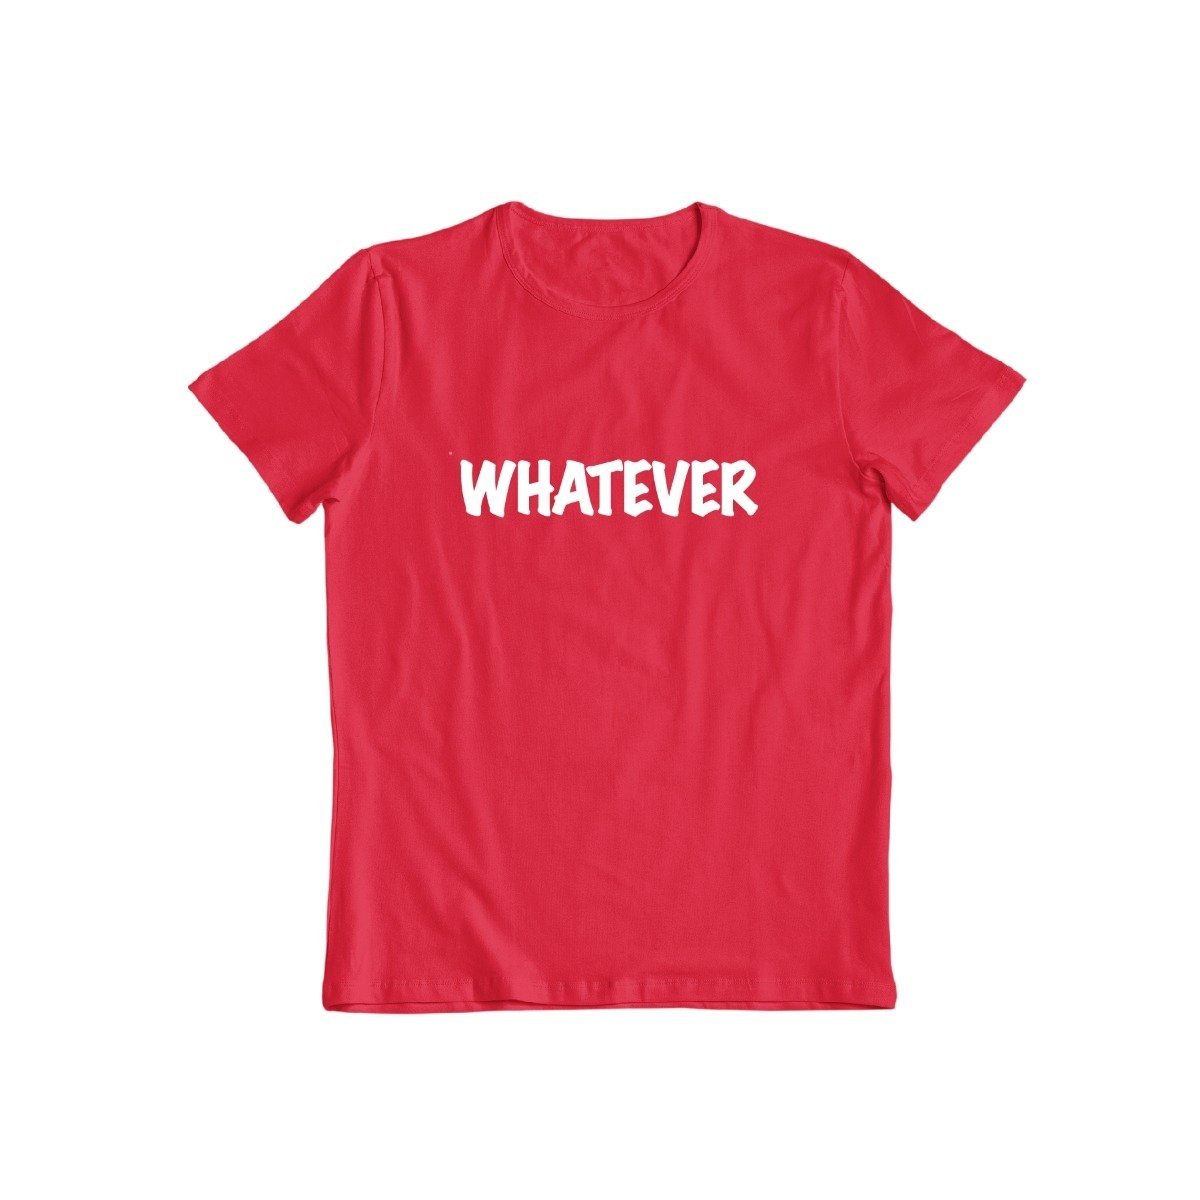 Whatever T-Shirt for Men and Women / Red / Small